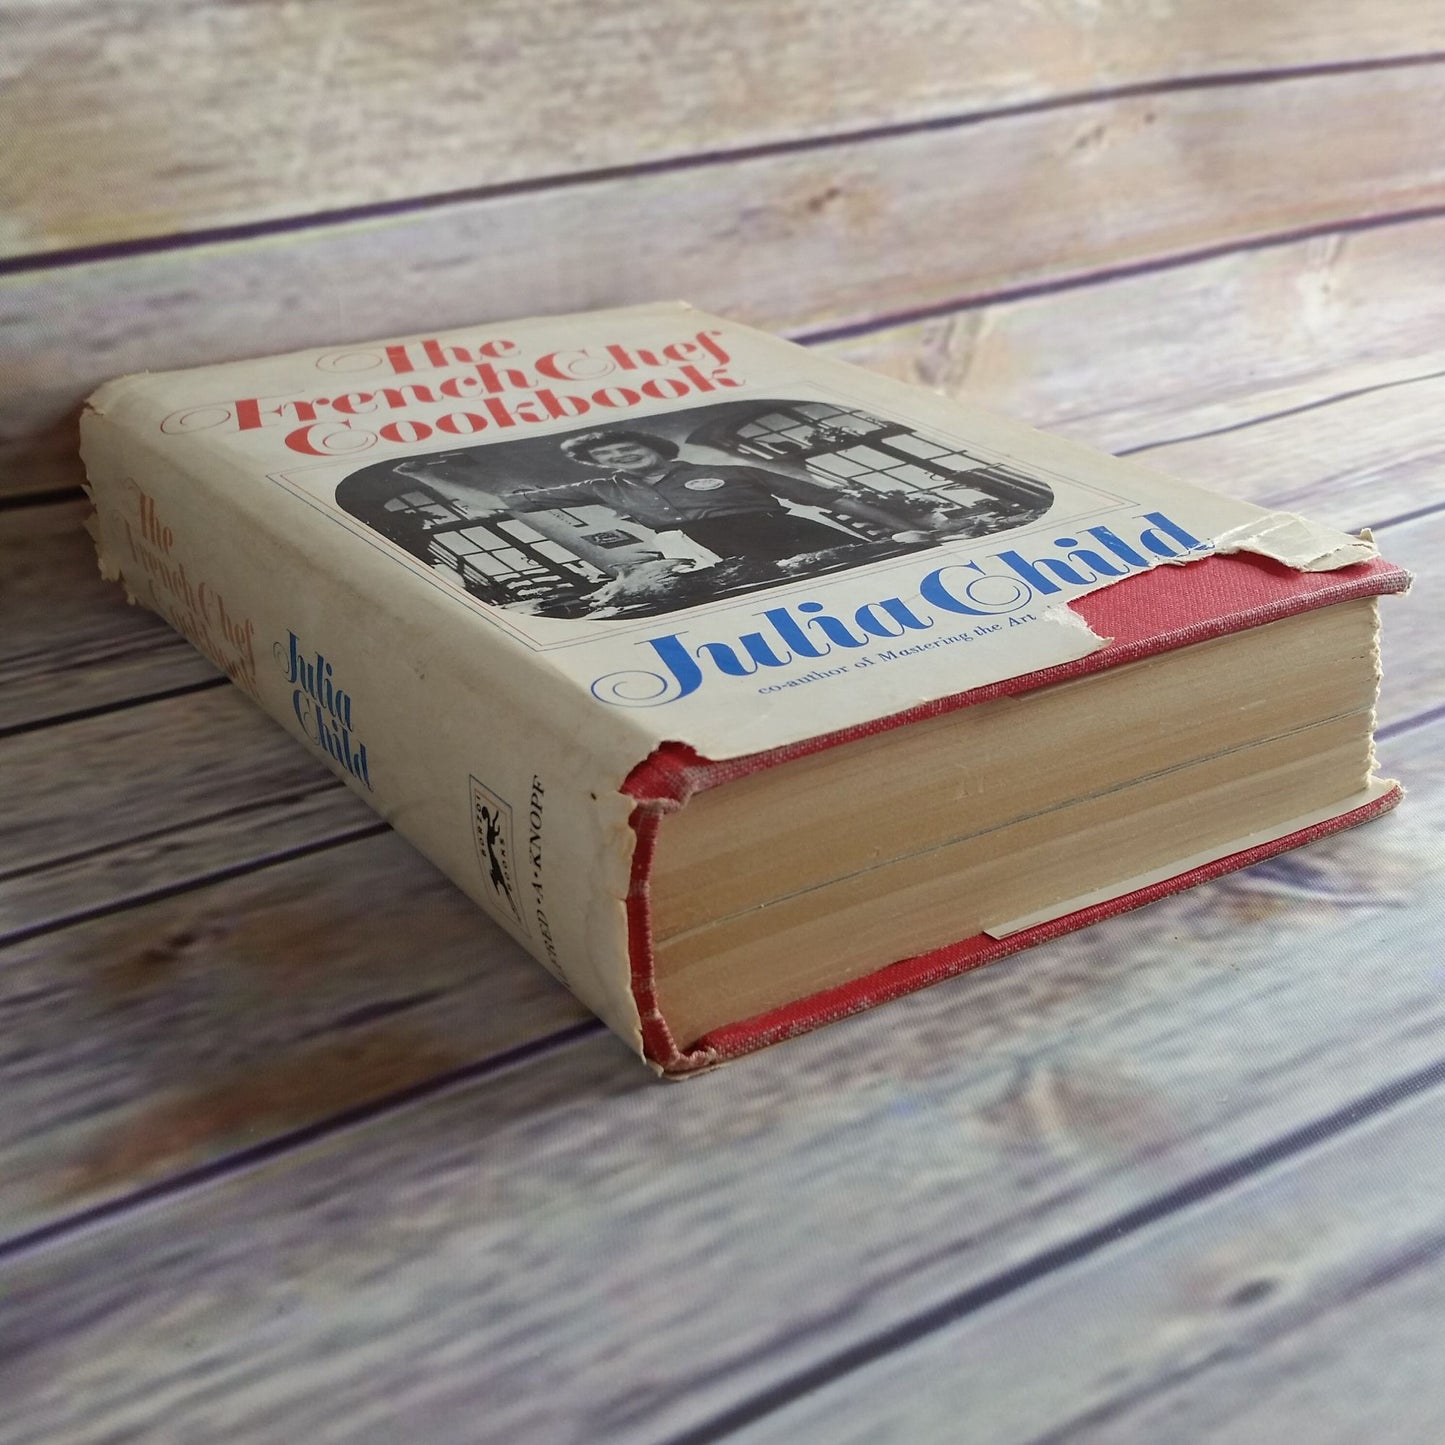 Vintage The French Chef Cookbook Recipes 1968 Julia Child Hardcover French Food Recipes WITH Dust Jacket